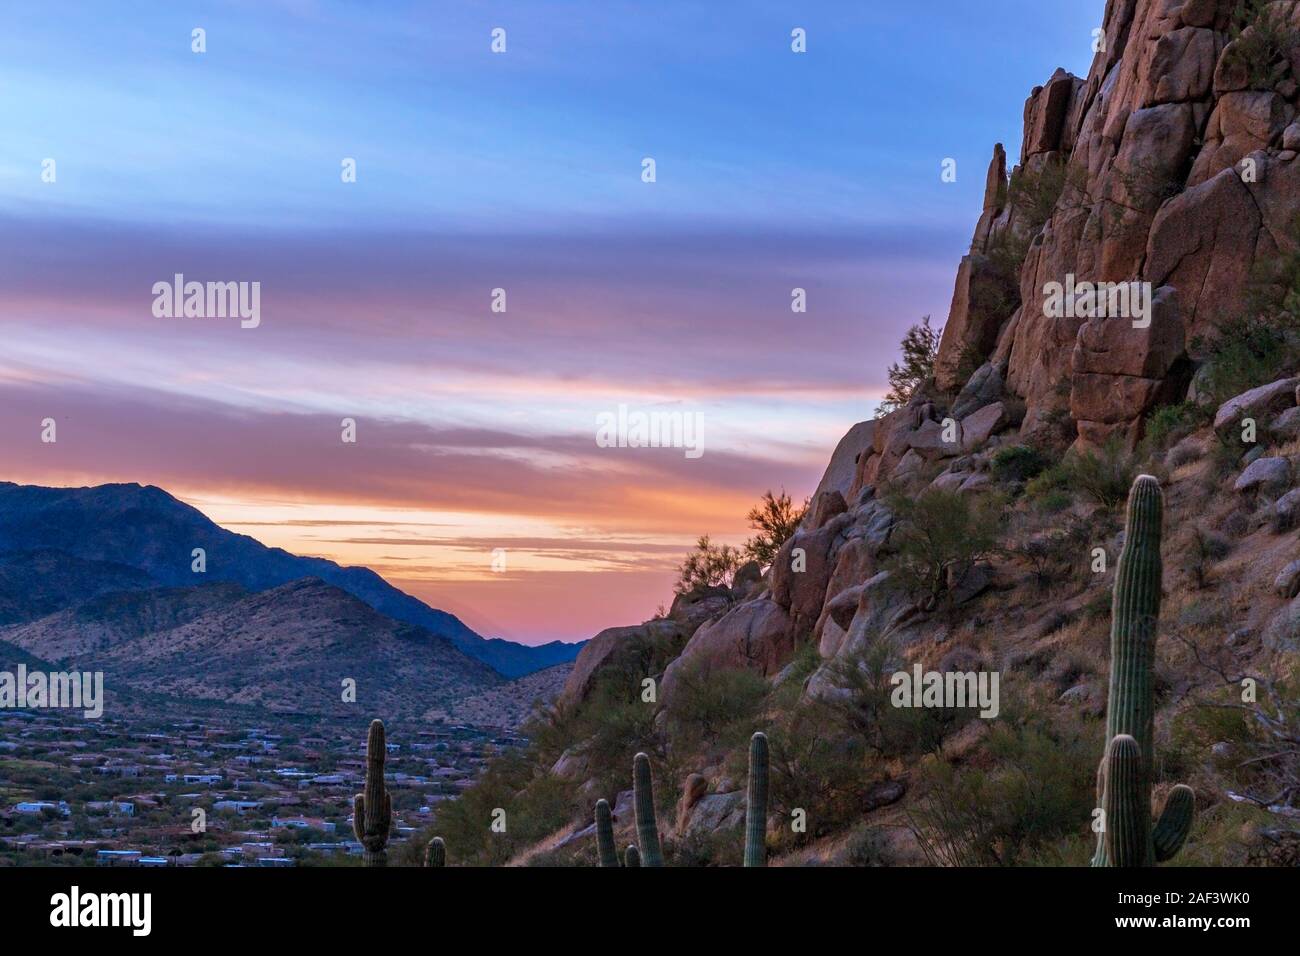 Early morning sunrise view off Pinnacle Peak hiking trail and park in North Scottsdale, Arizona. Stock Photo